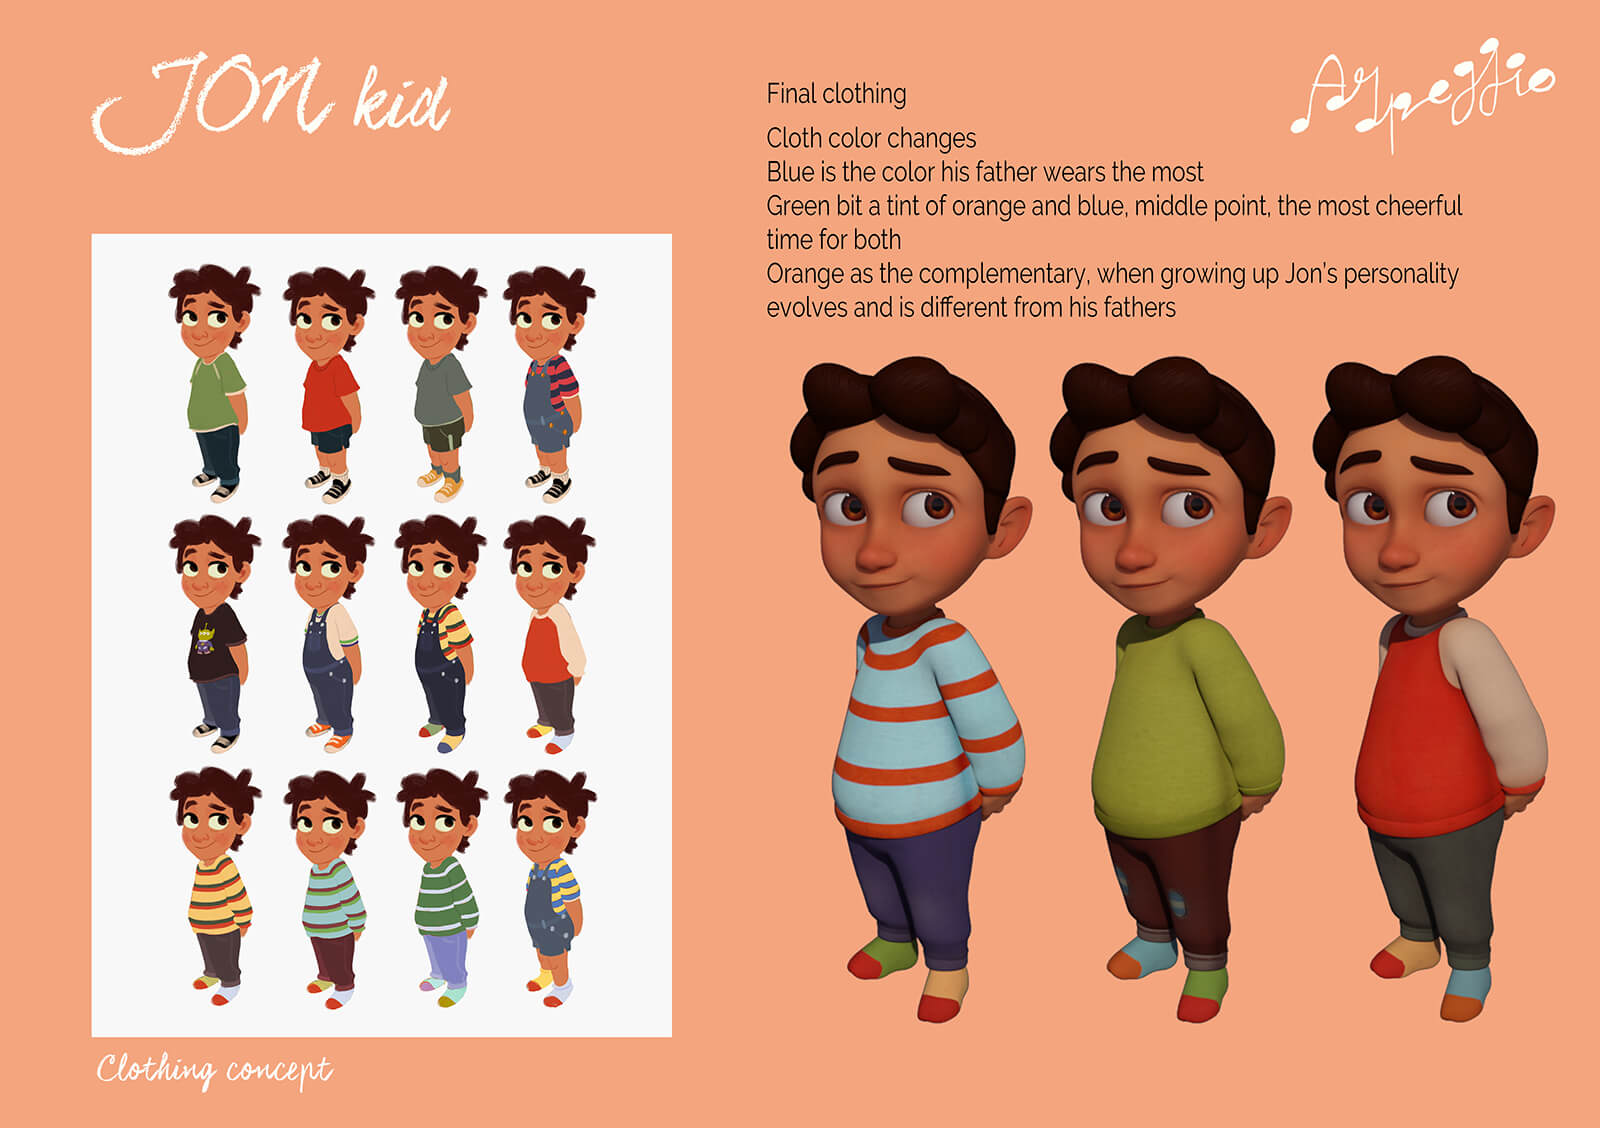 Clothing concept and final color choices for the character of Jon/Kid from the film Arpeggio